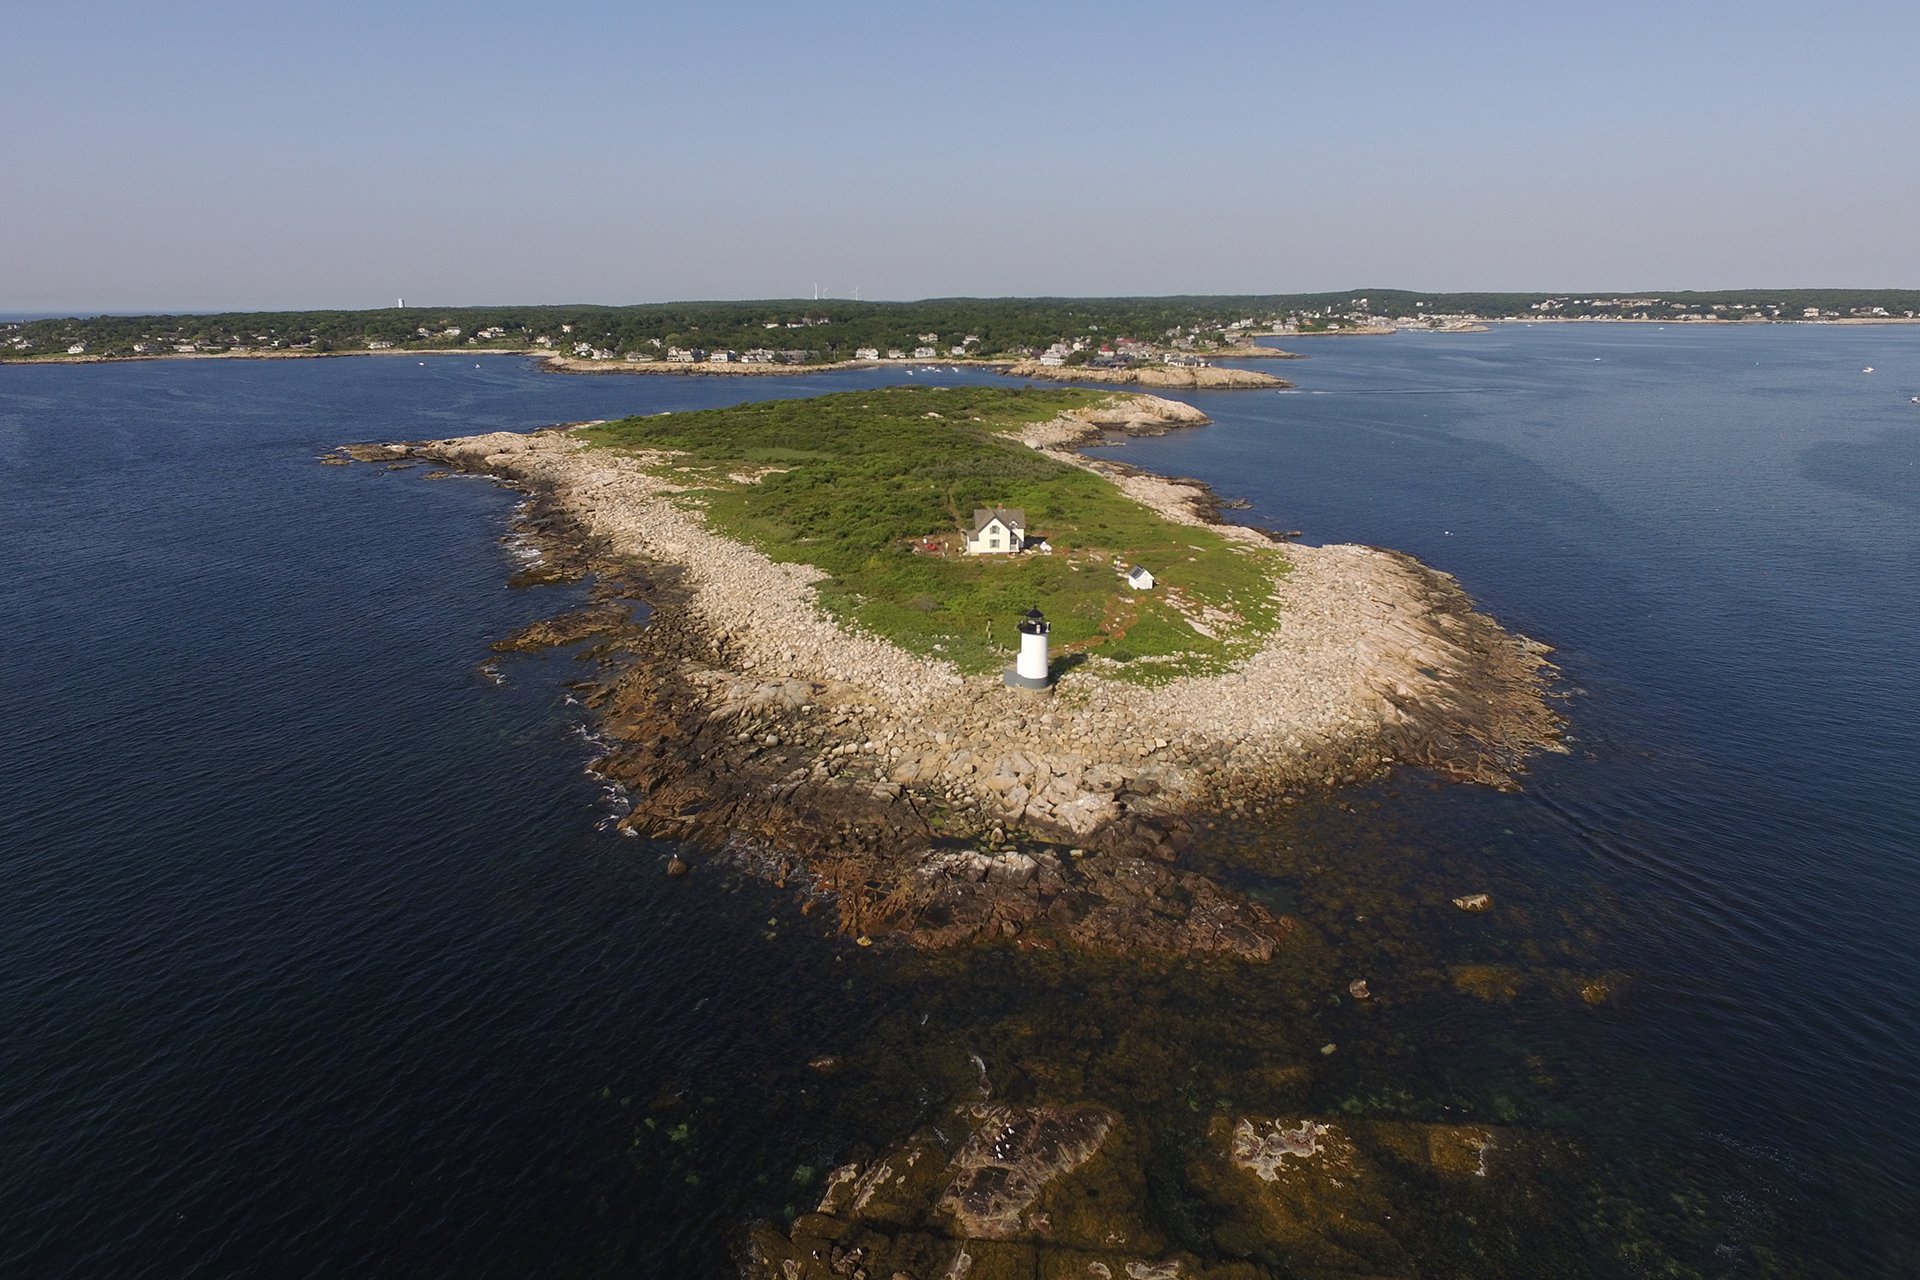 Aerial view of island - rocky shore, lighthouse, and green center